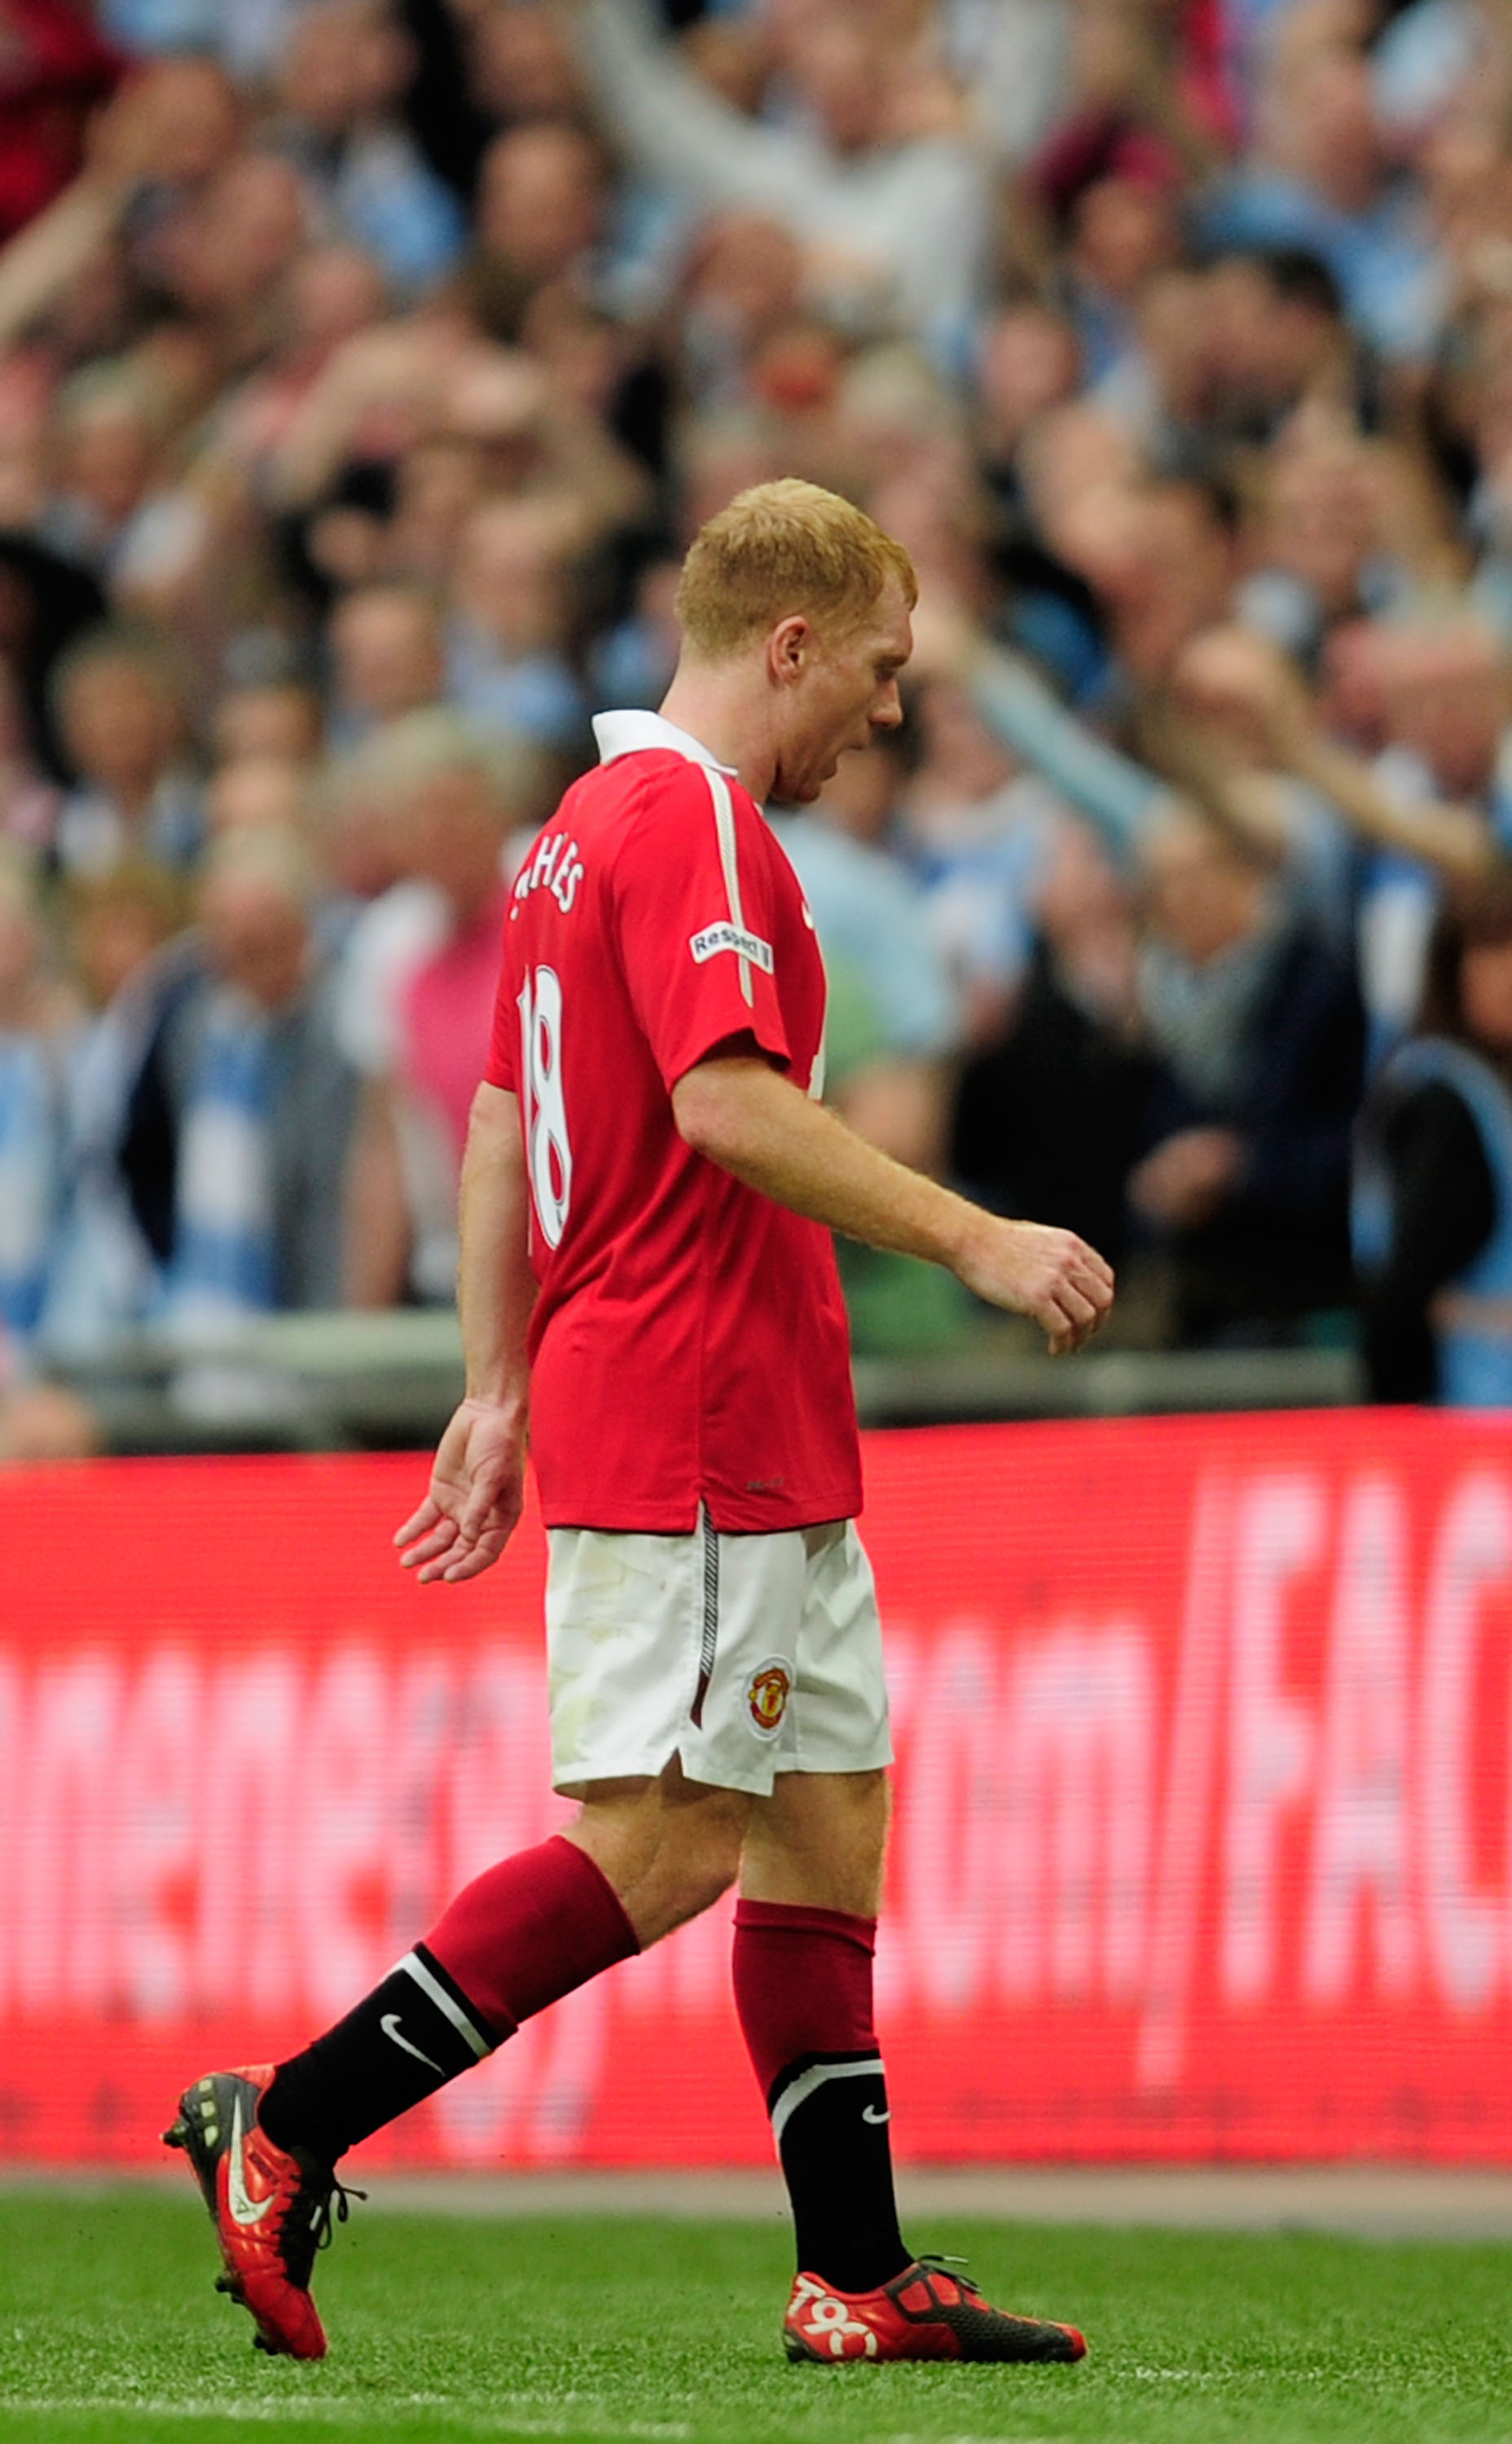 LONDON, ENGLAND - APRIL 16:  Paul Scholes is shown a red card after his high footed challenge Pablo Zabaleta of Manchester City during the FA Cup sponsored by E.ON semi final match between Manchester City and Manchester United at Wembley Stadium on April